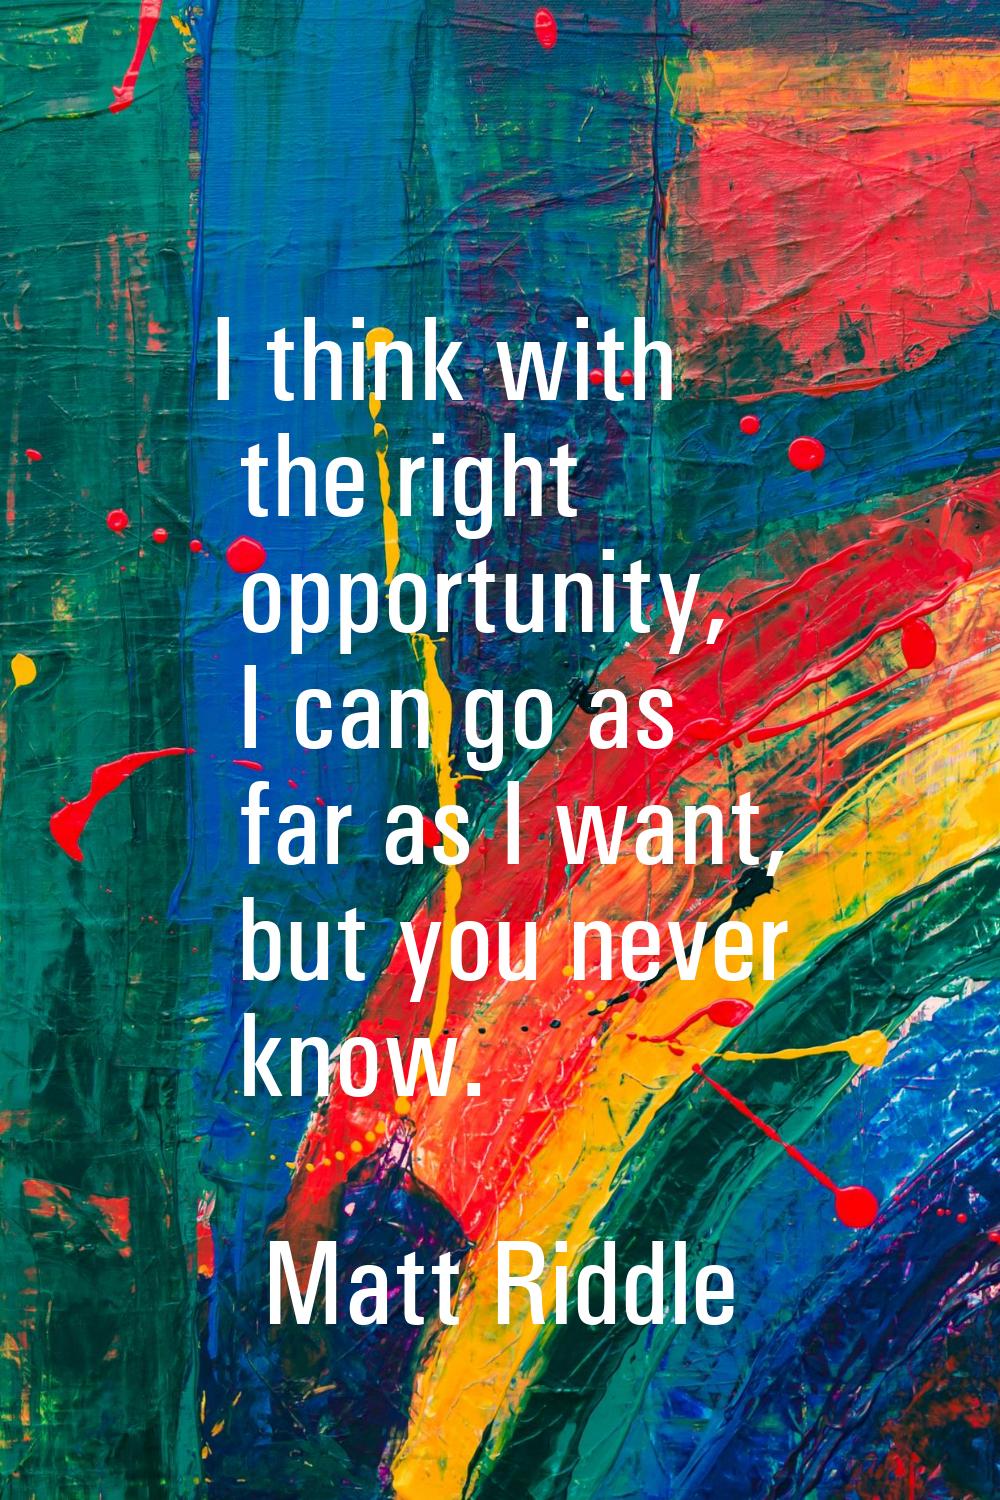 I think with the right opportunity, I can go as far as I want, but you never know.